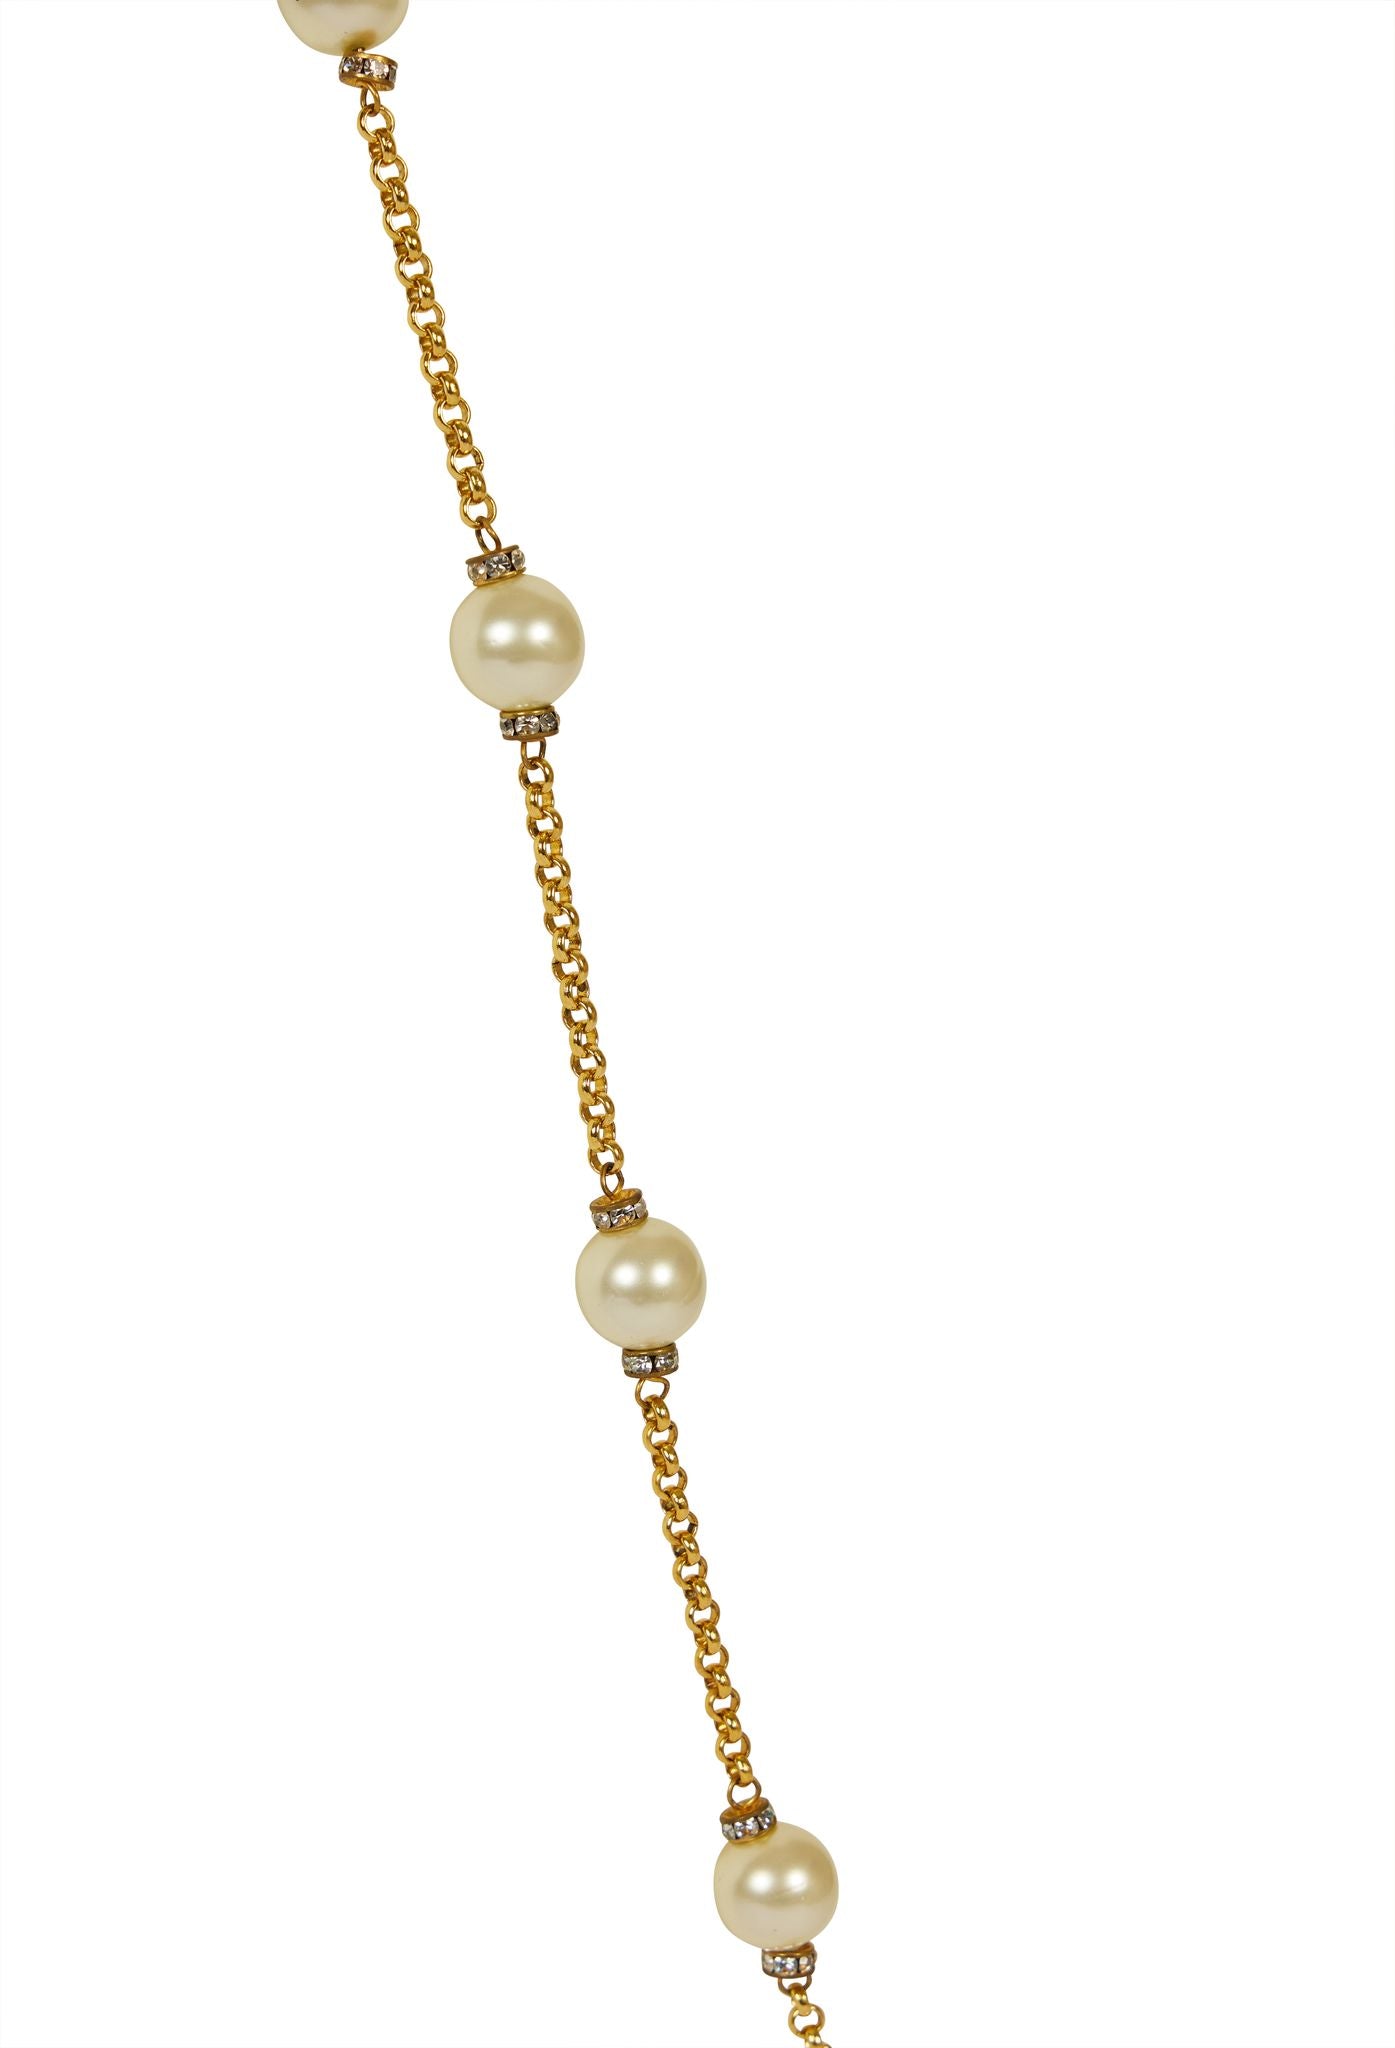 Chanel Pearl & Crystal Sautoir Necklace - Vintage Lux